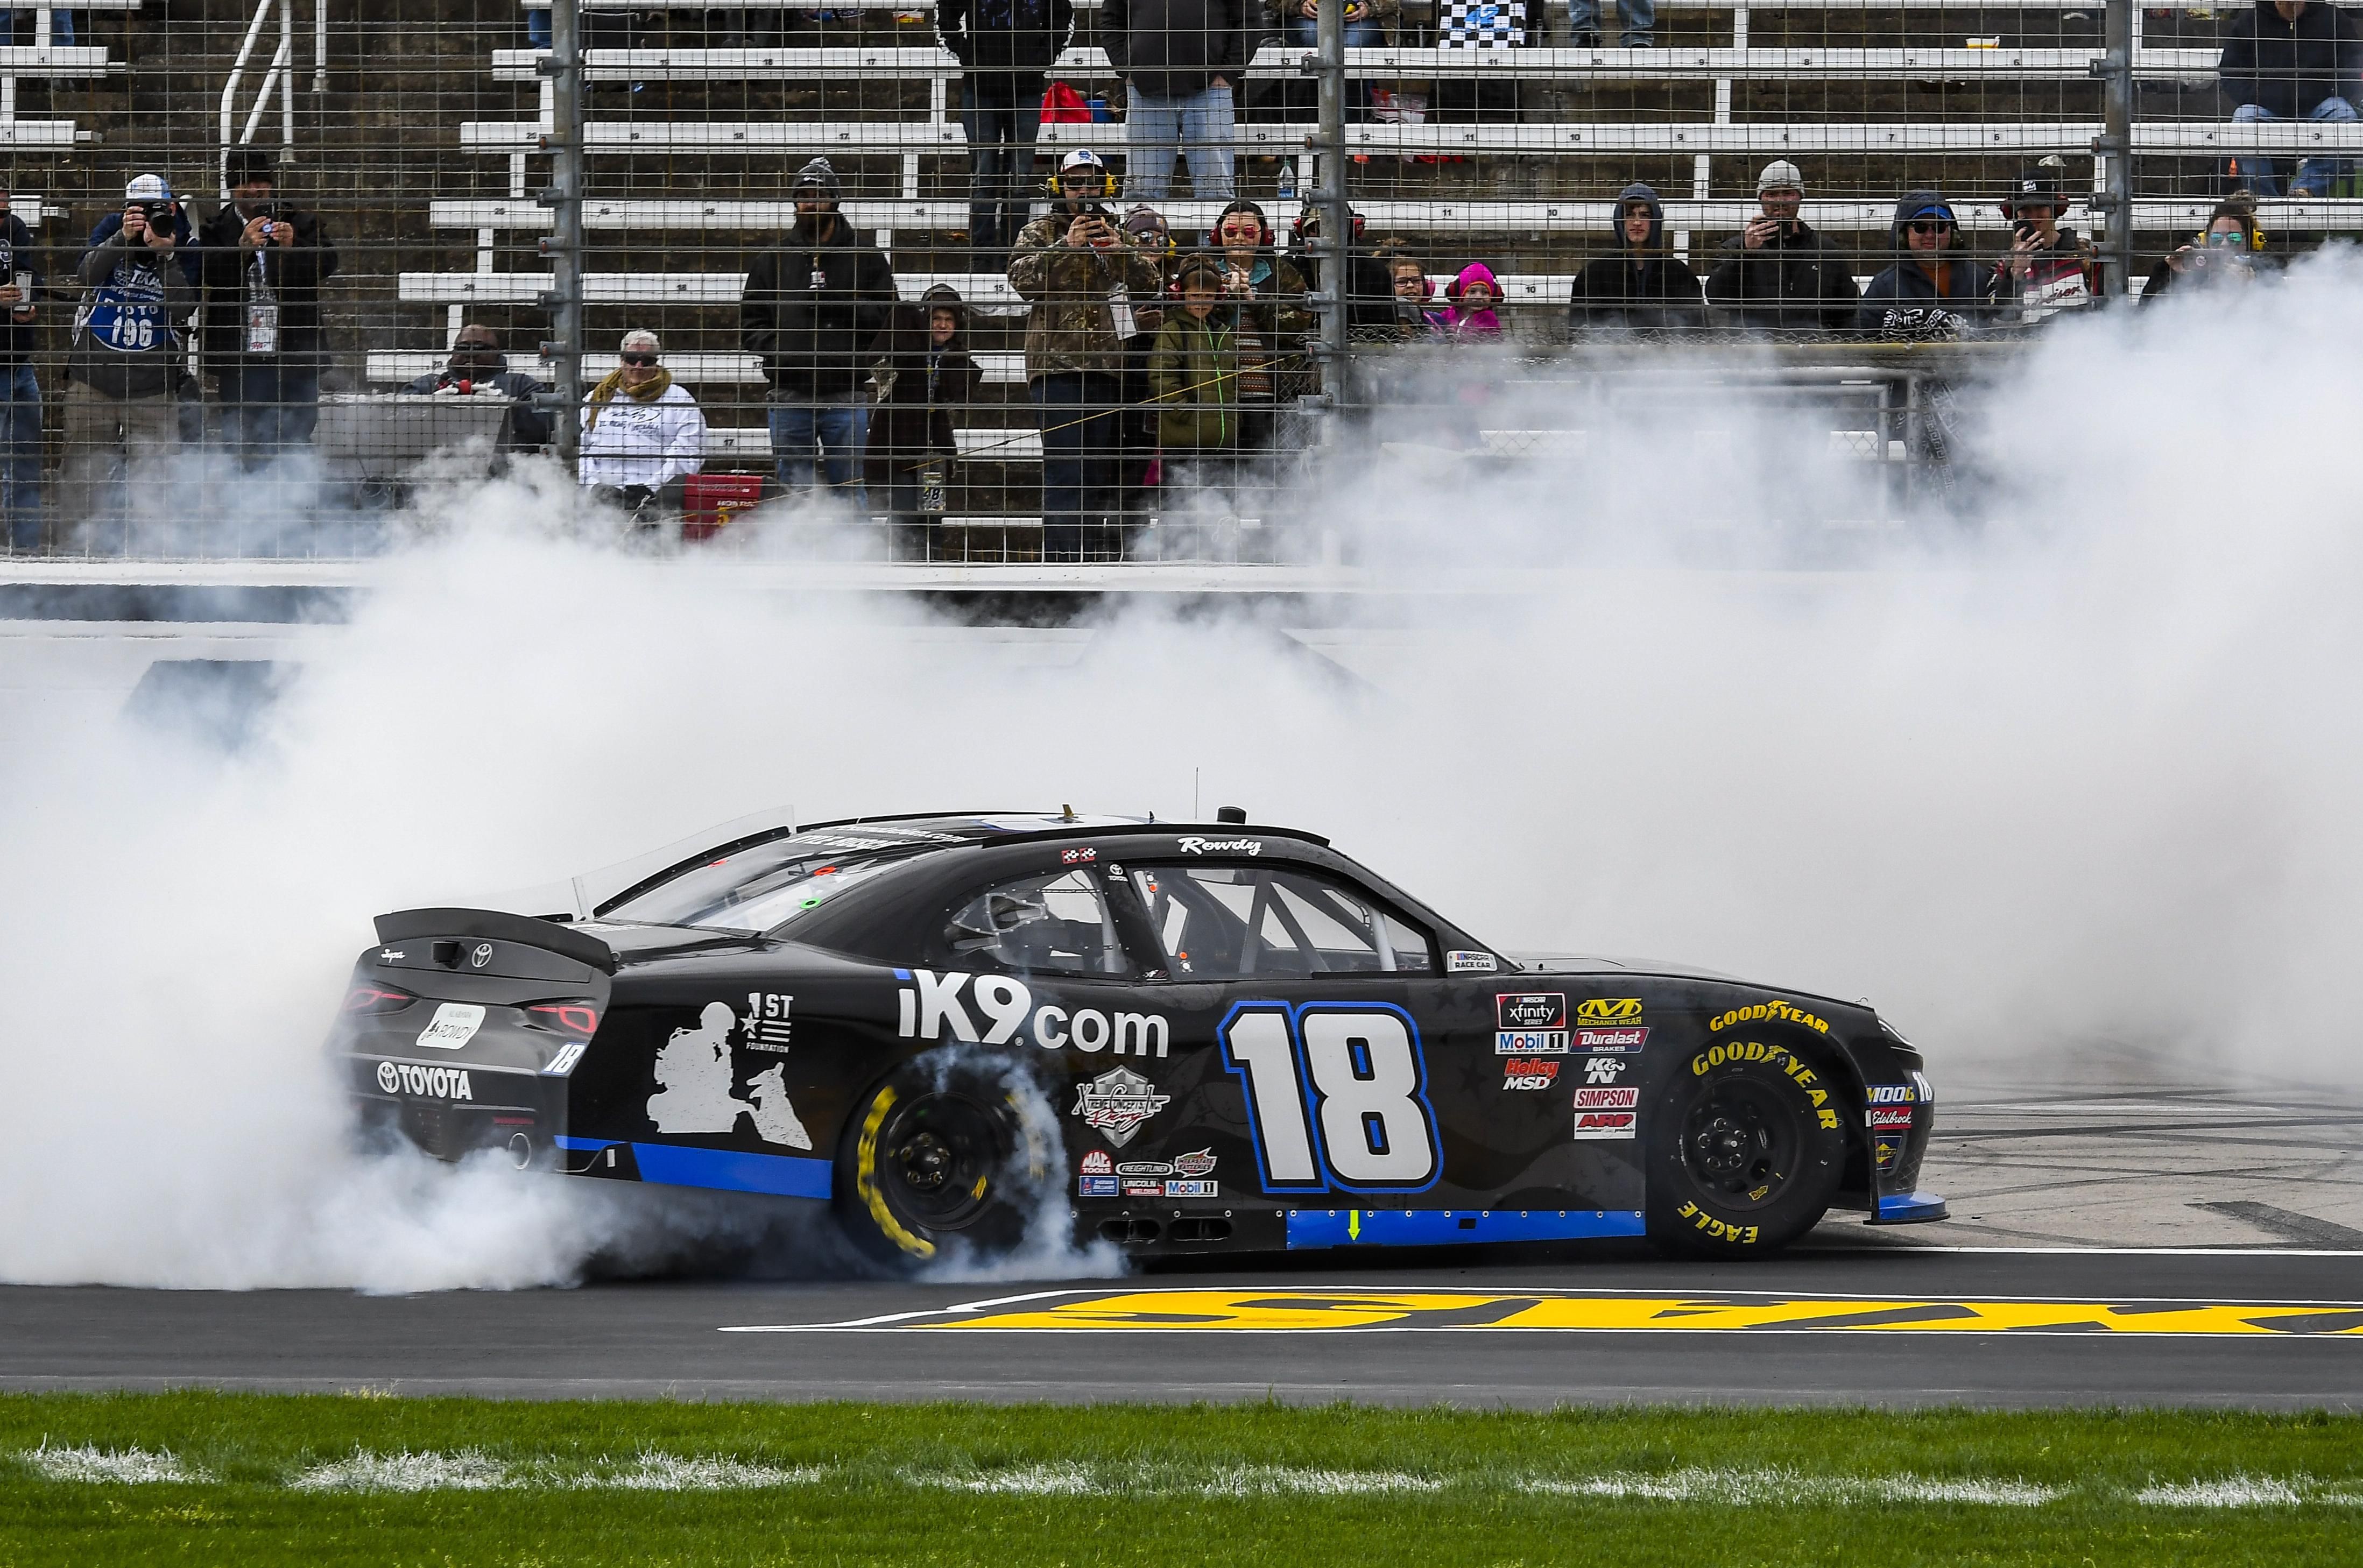 Kyle Busch Burnout in his Toyota NASCAR vehicle